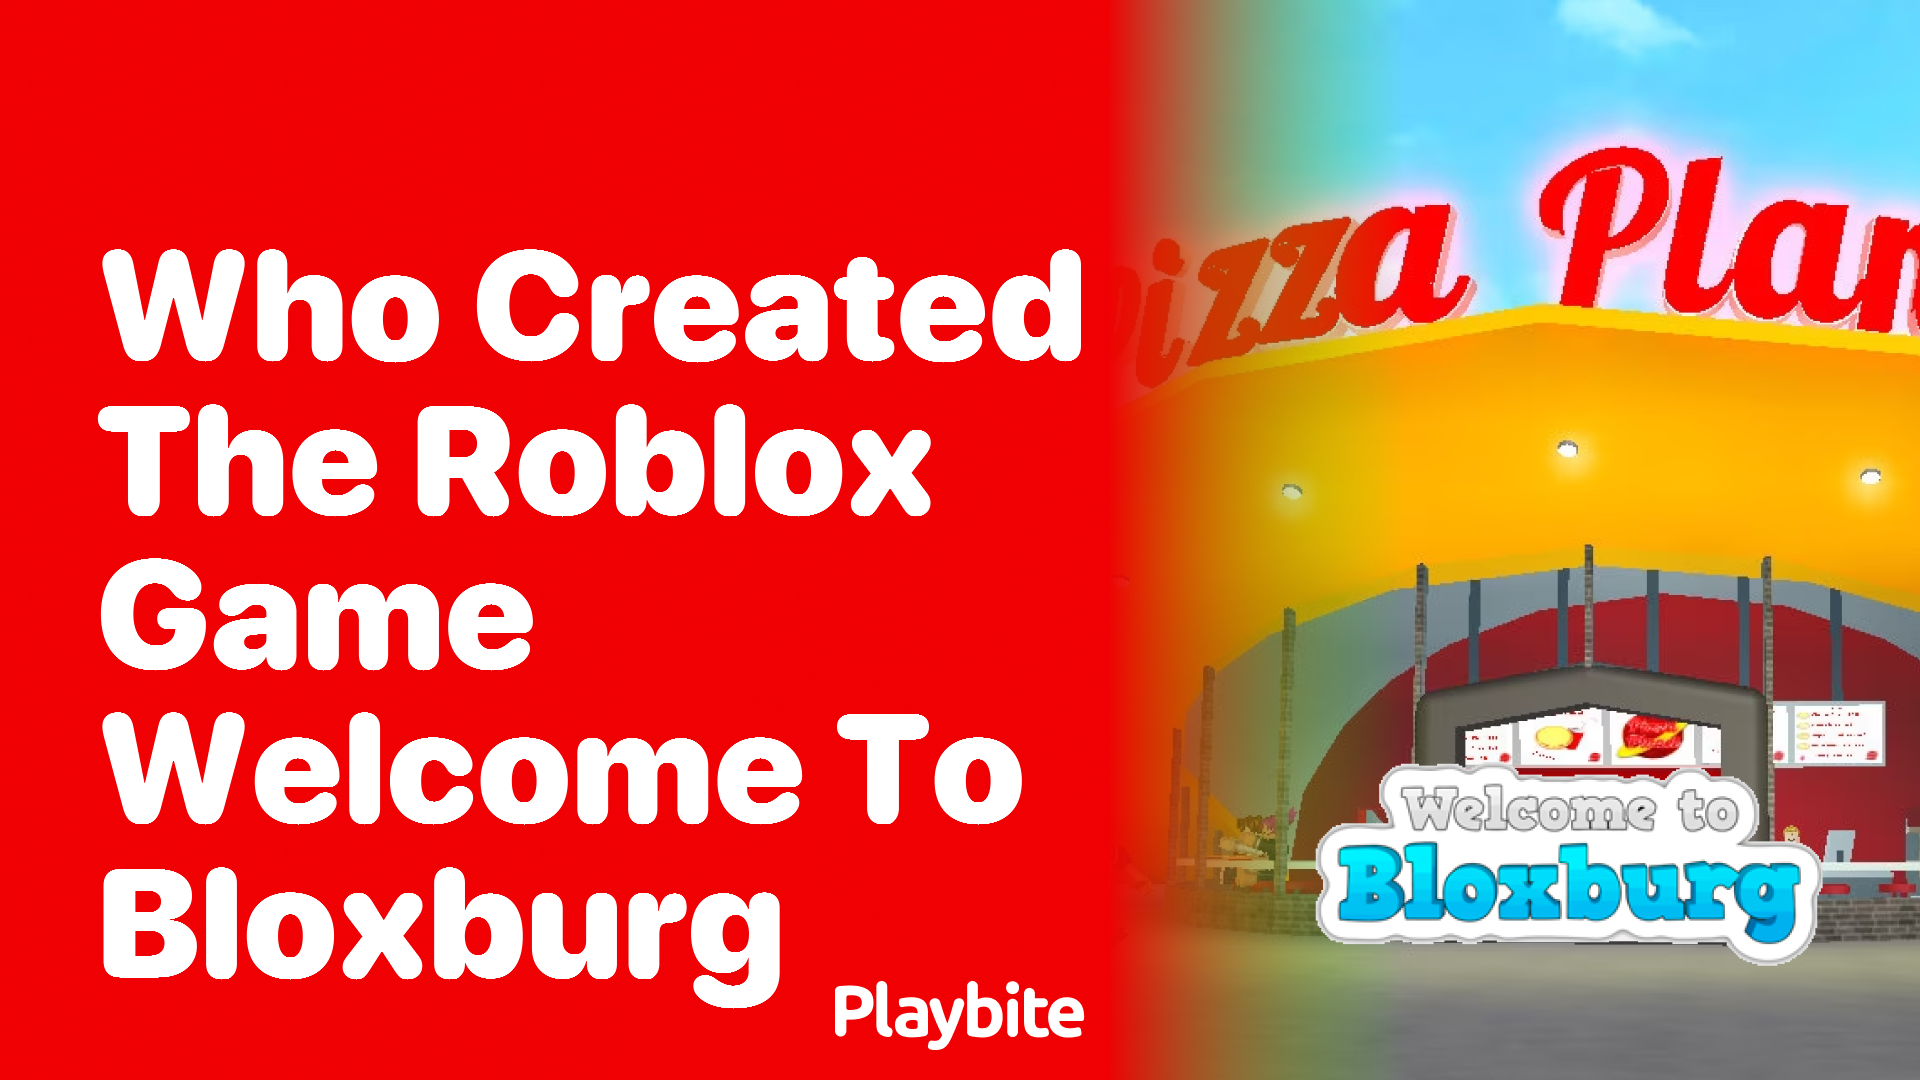 Who Created the Roblox Game Welcome to Bloxburg?